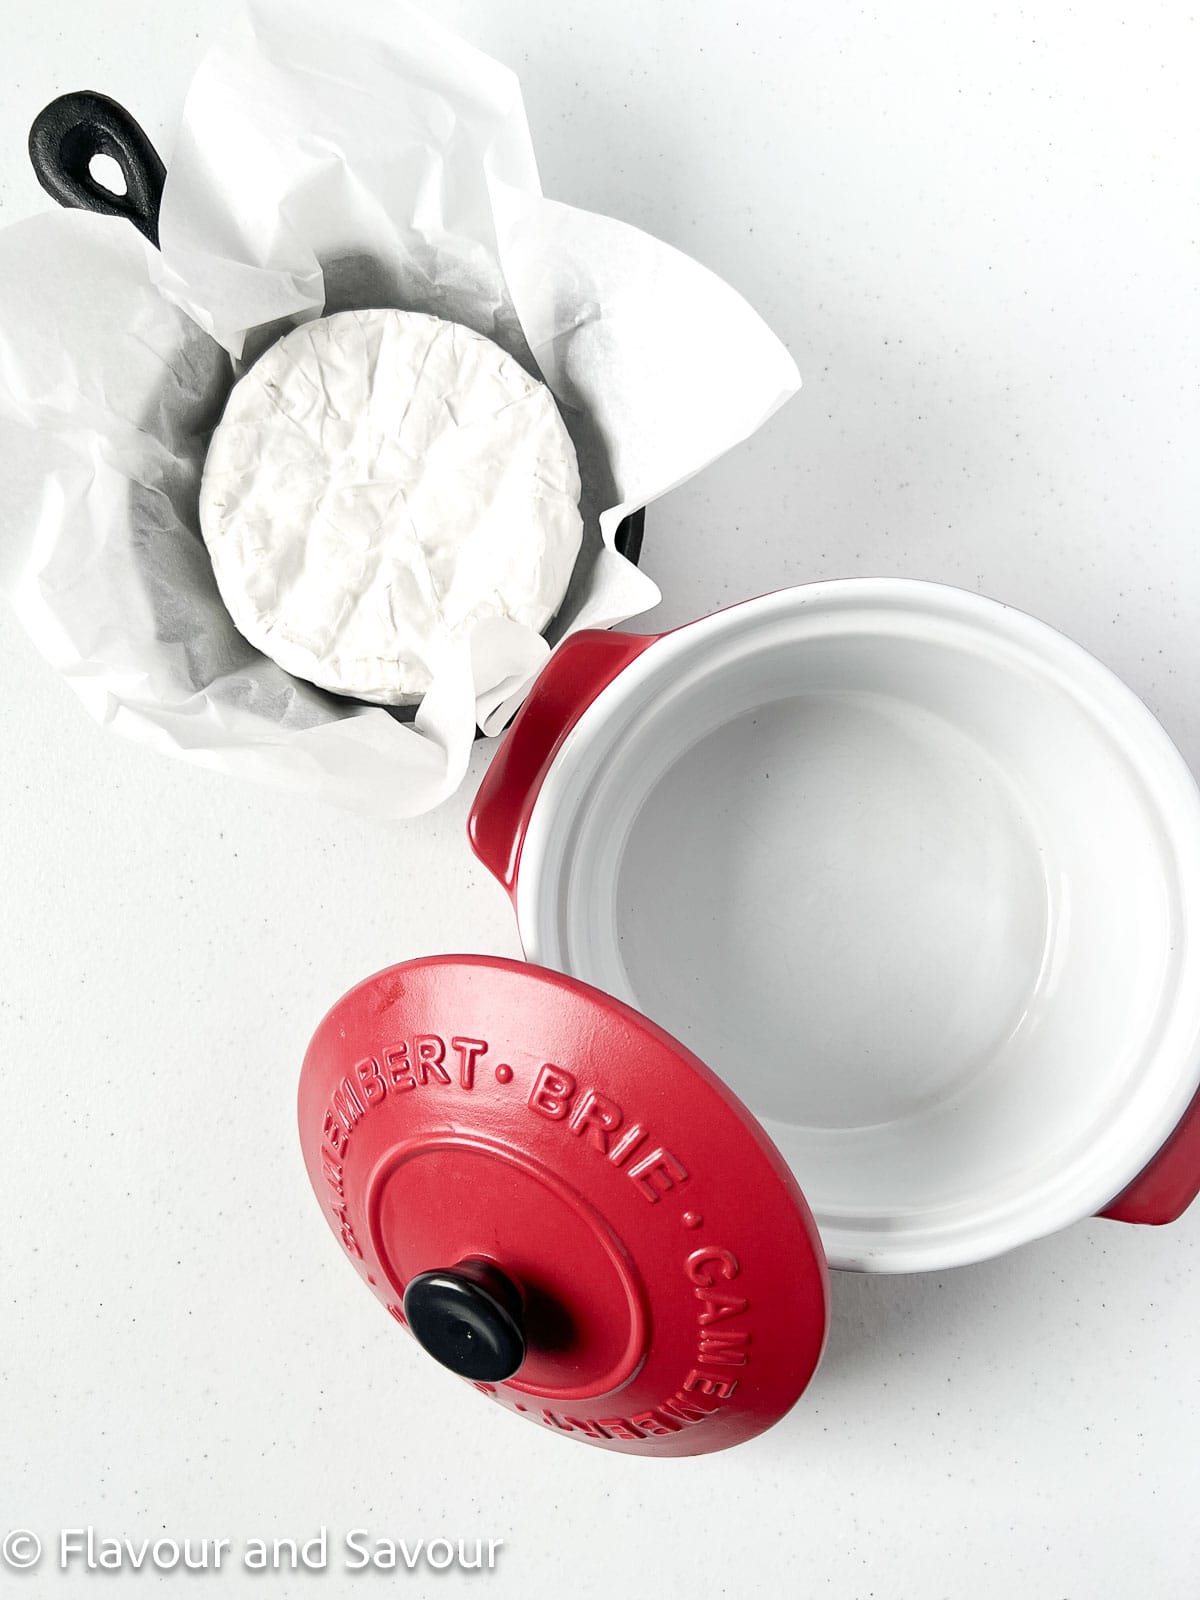 A mini cast iron pan or a Brie baker: two ways to bake Brie cheese.